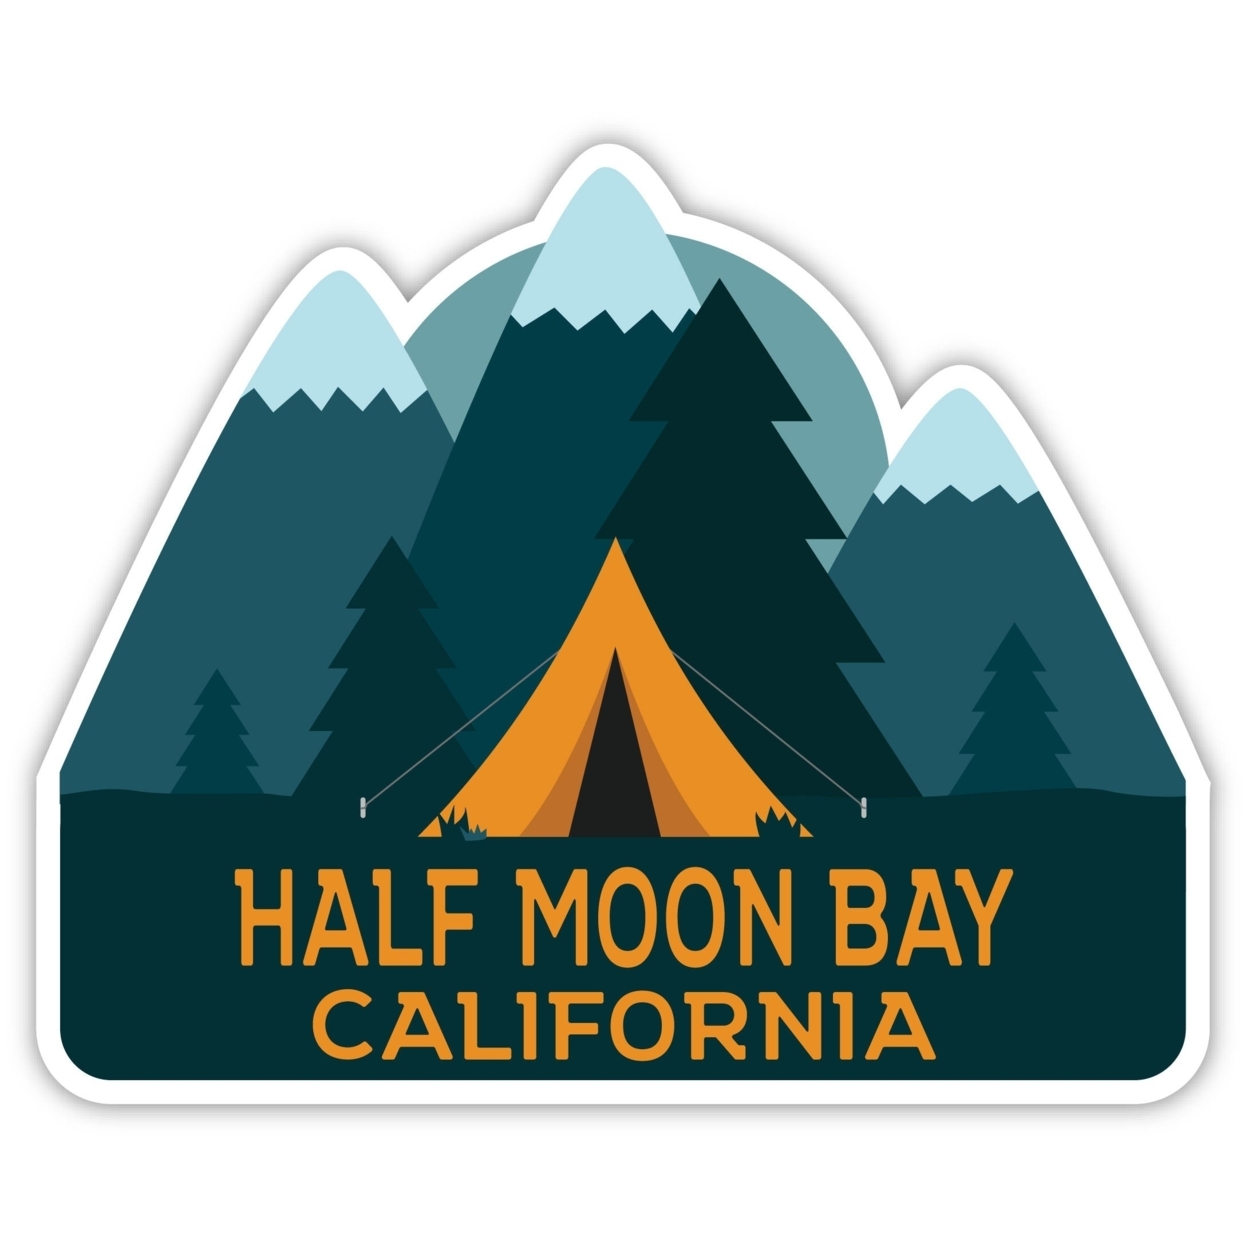 Half Moon Bay California Souvenir Decorative Stickers (Choose Theme And Size) - 4-Pack, 2-Inch, Bear